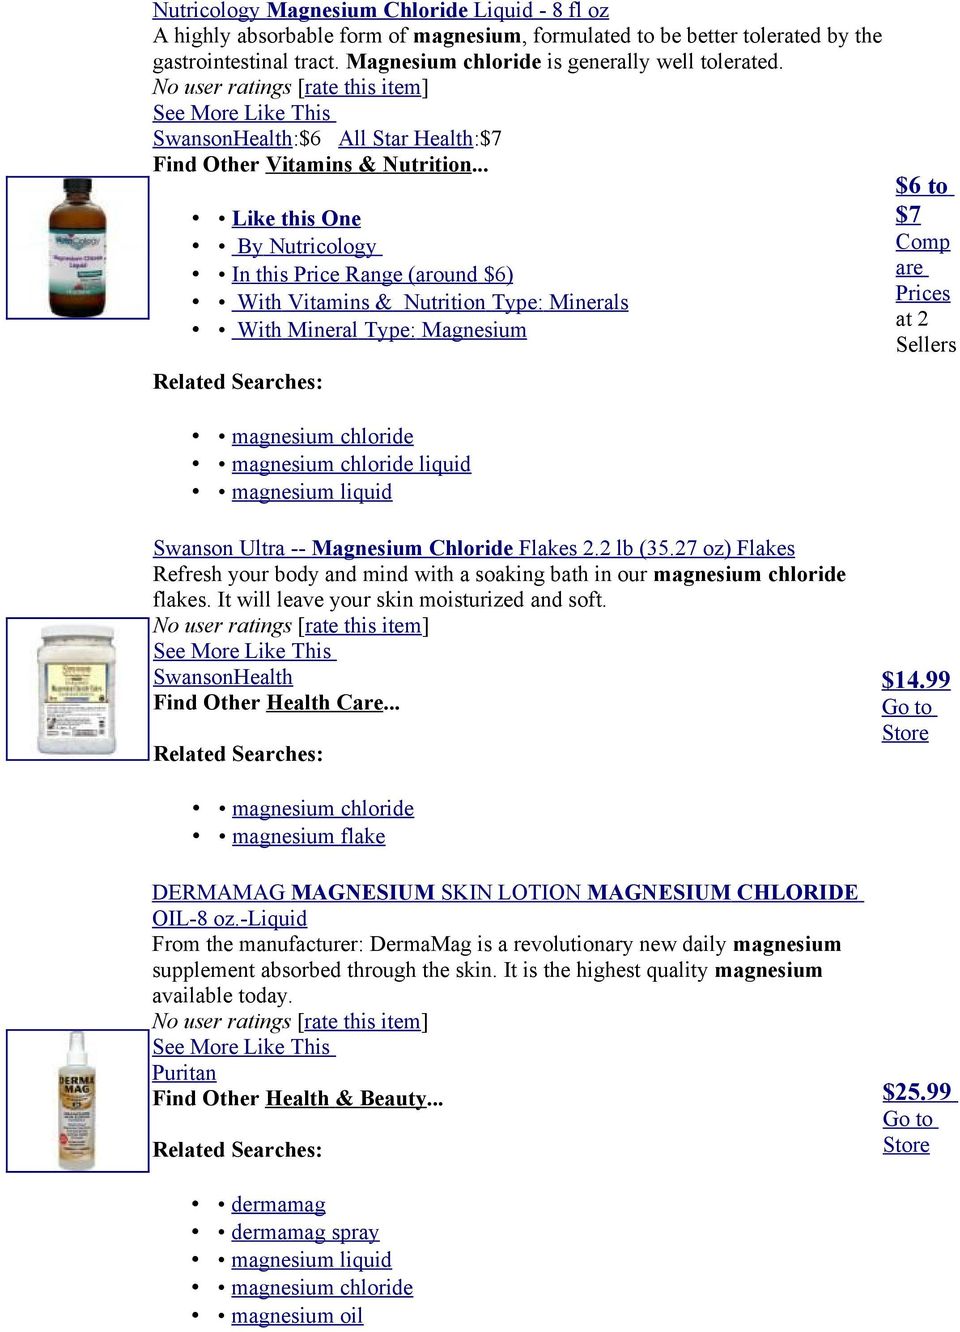 .. By Nutricology In this Price Range (around $6) With Mineral Type: Magnesium magnesium chloride magnesium chloride liquid magnesium liquid $6 to $7 Comp are Prices at 2 Sellers Swanson Ultra --